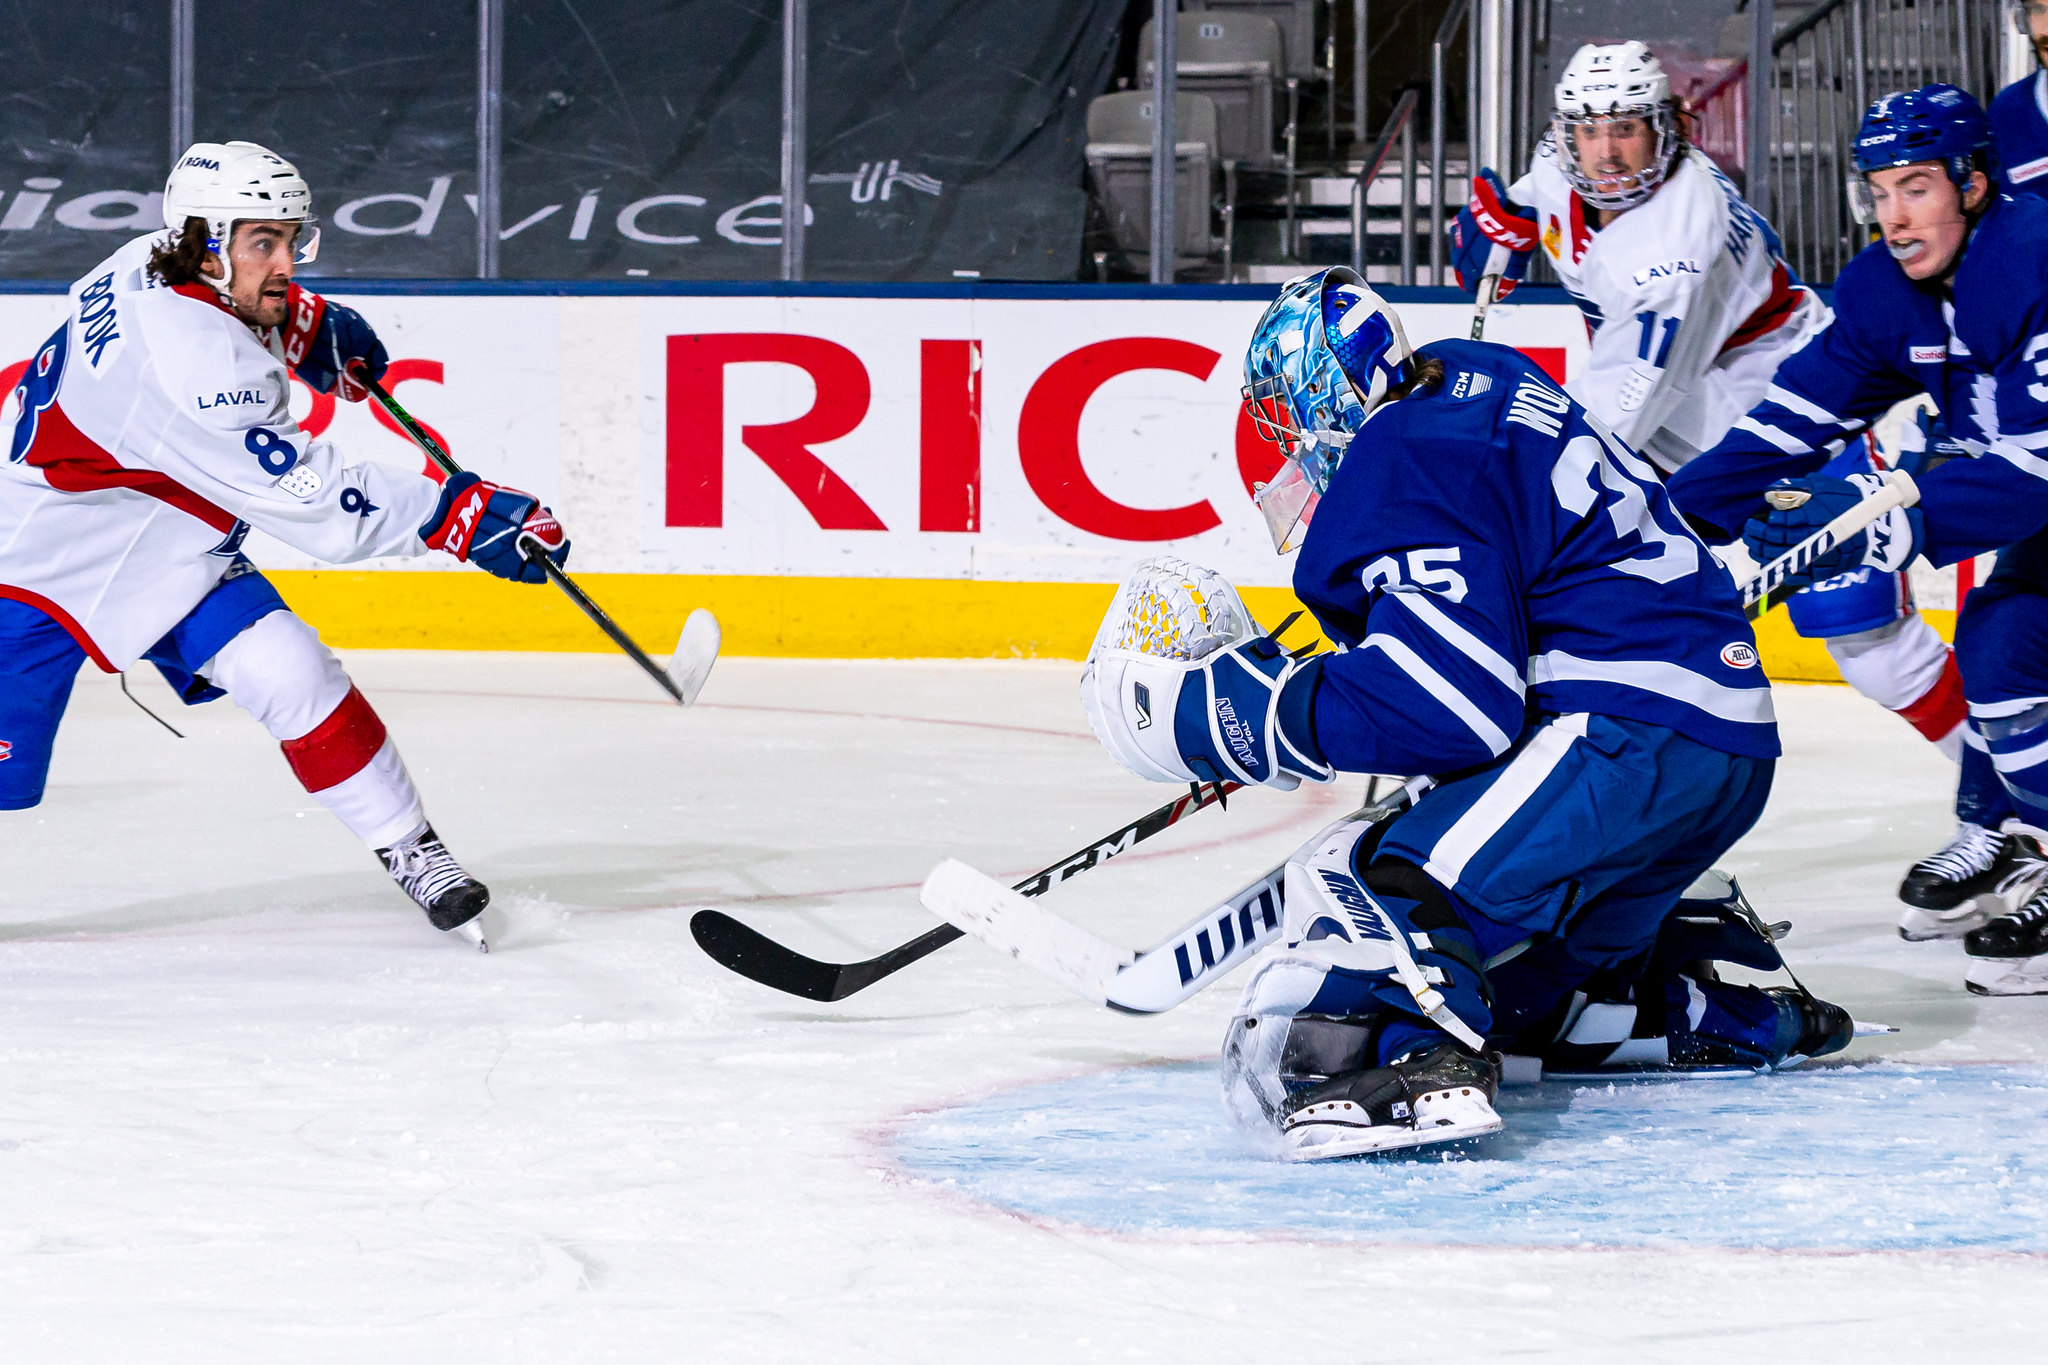 Mikko Kokkonen scores his first AHL goal, Joseph Woll excellent again in Toronto Marlies win over Laval